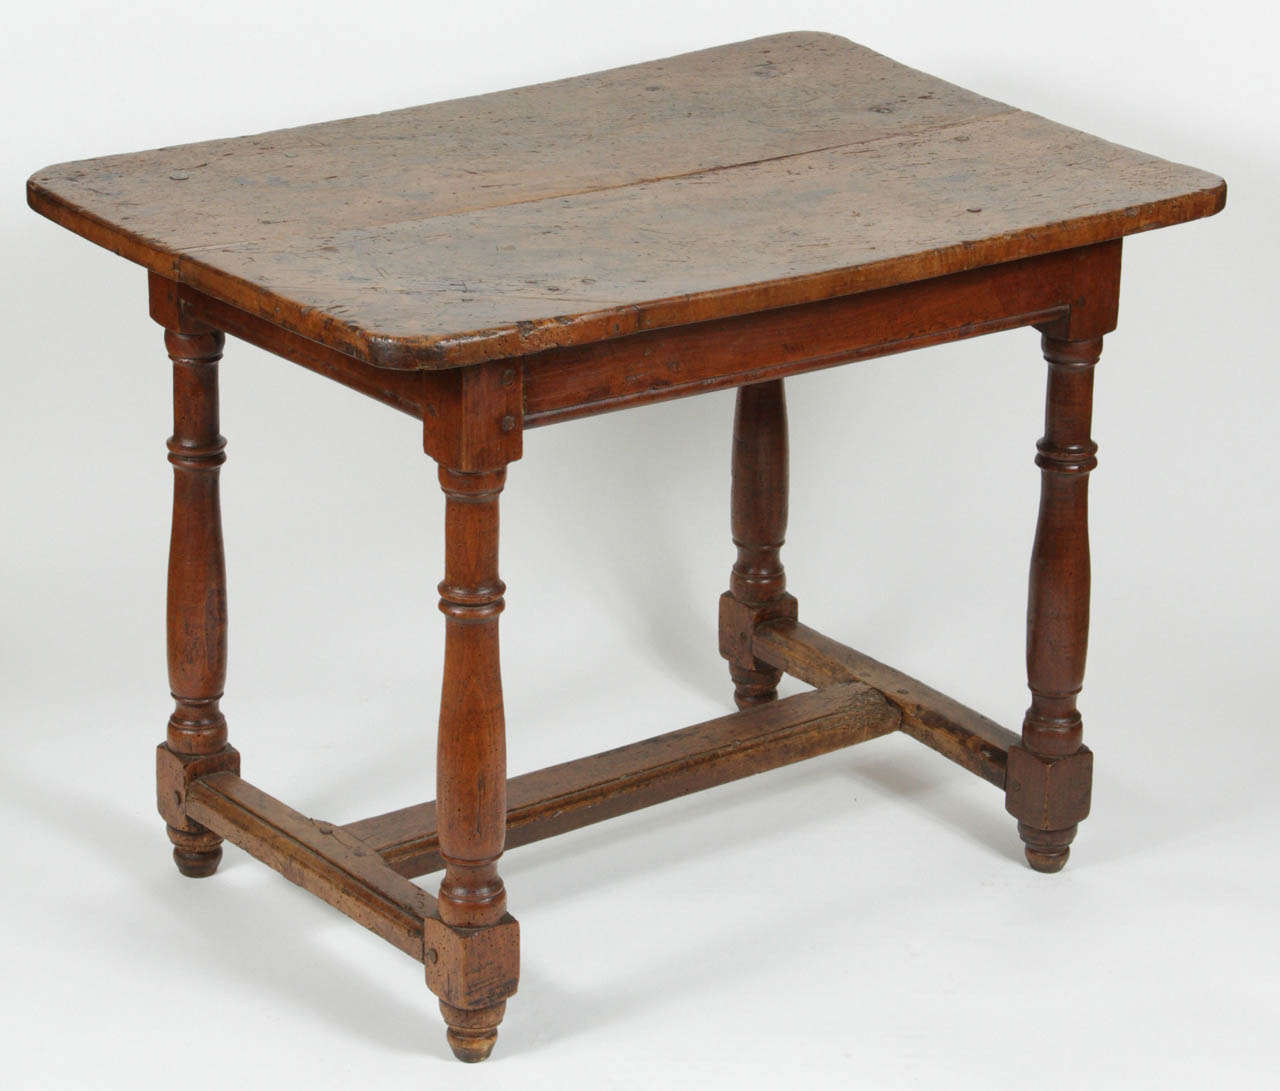 19th century table from the South of France.